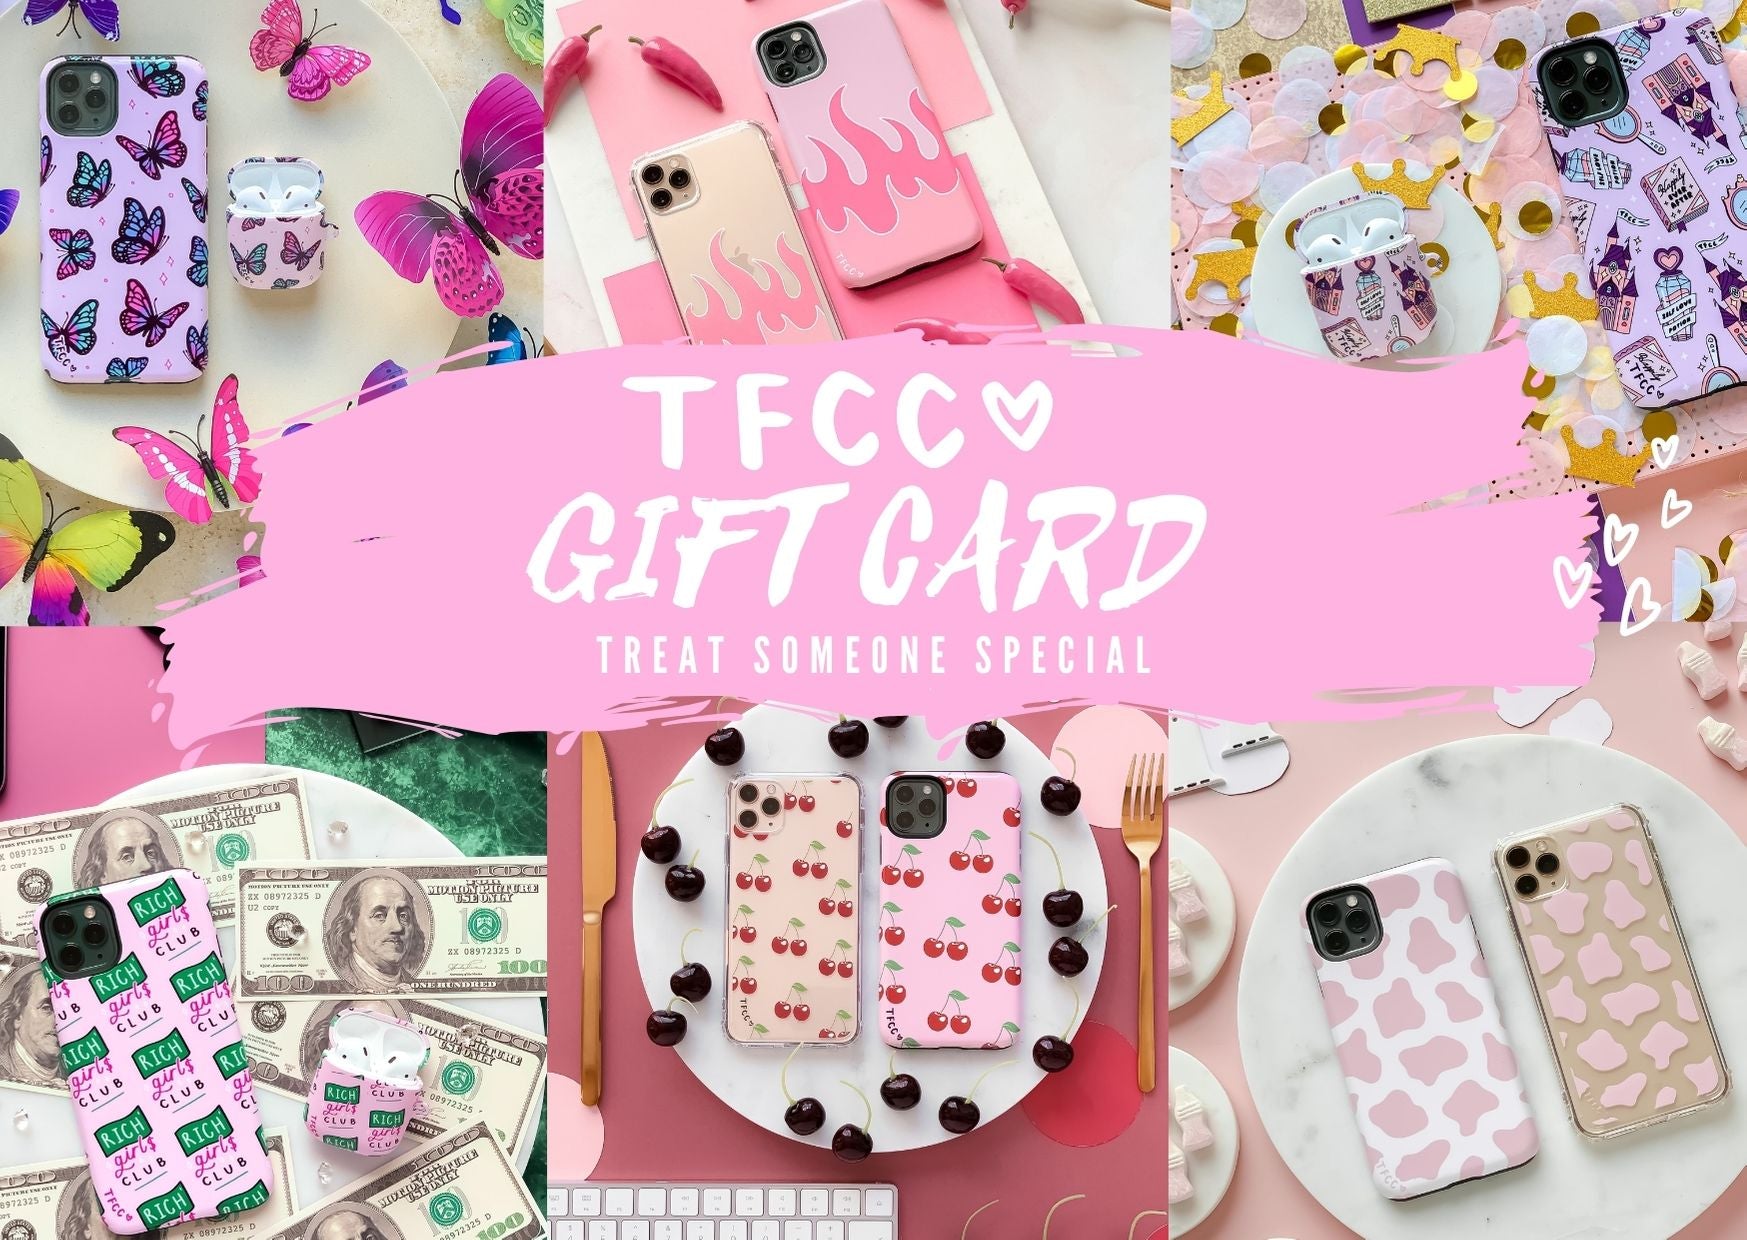 TFCC GIFT VOUCHER - thefonecasecompany